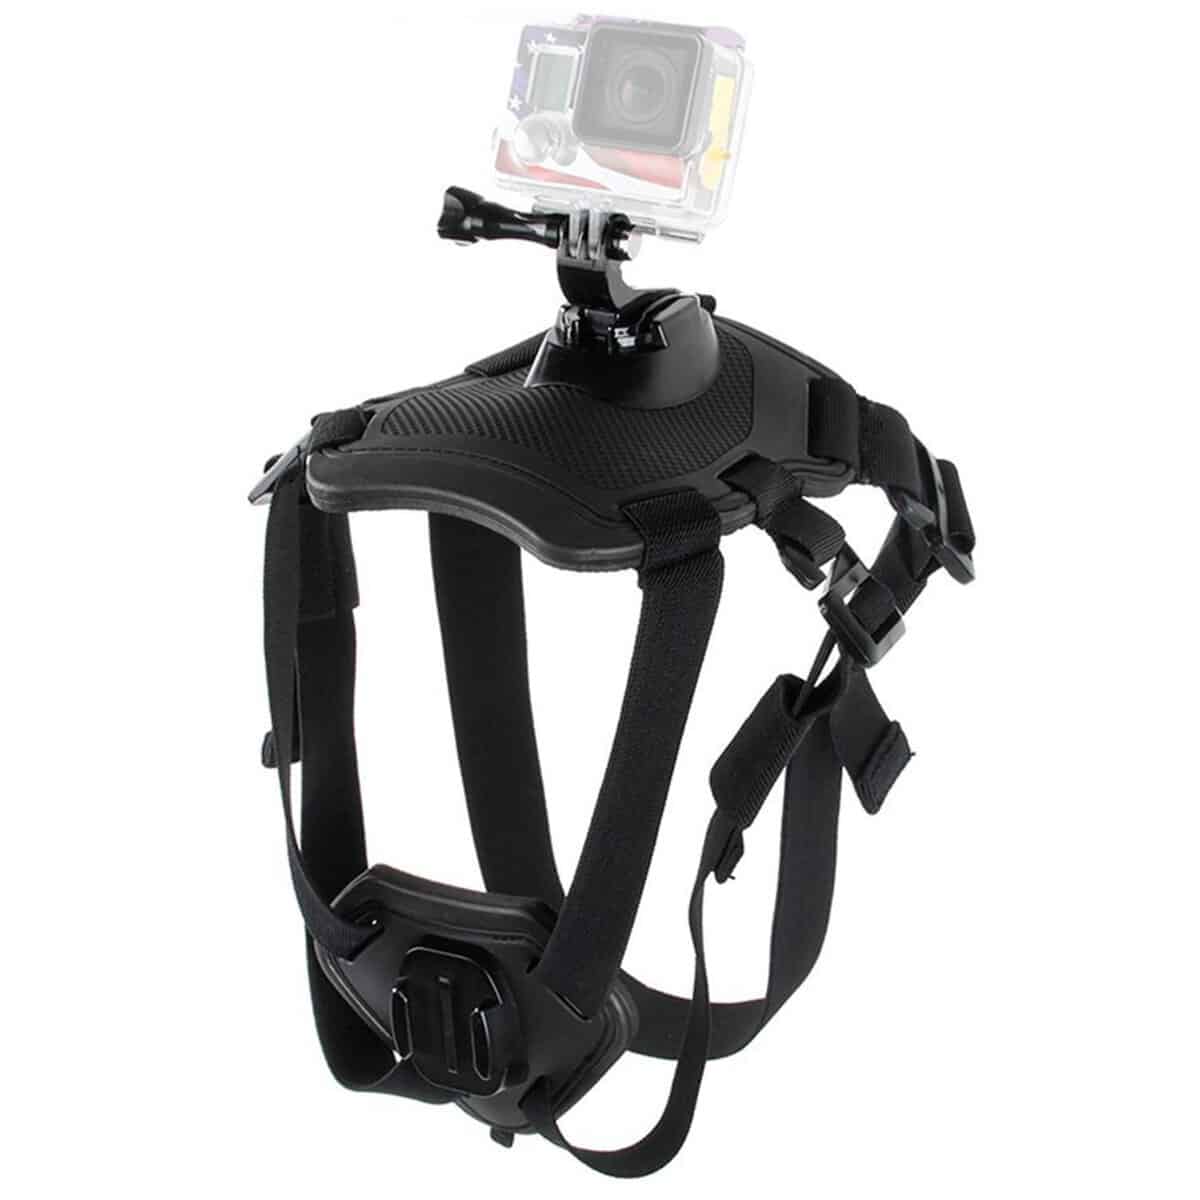 GoPro Dog Mount 3 Different Choices for Camera Canines!